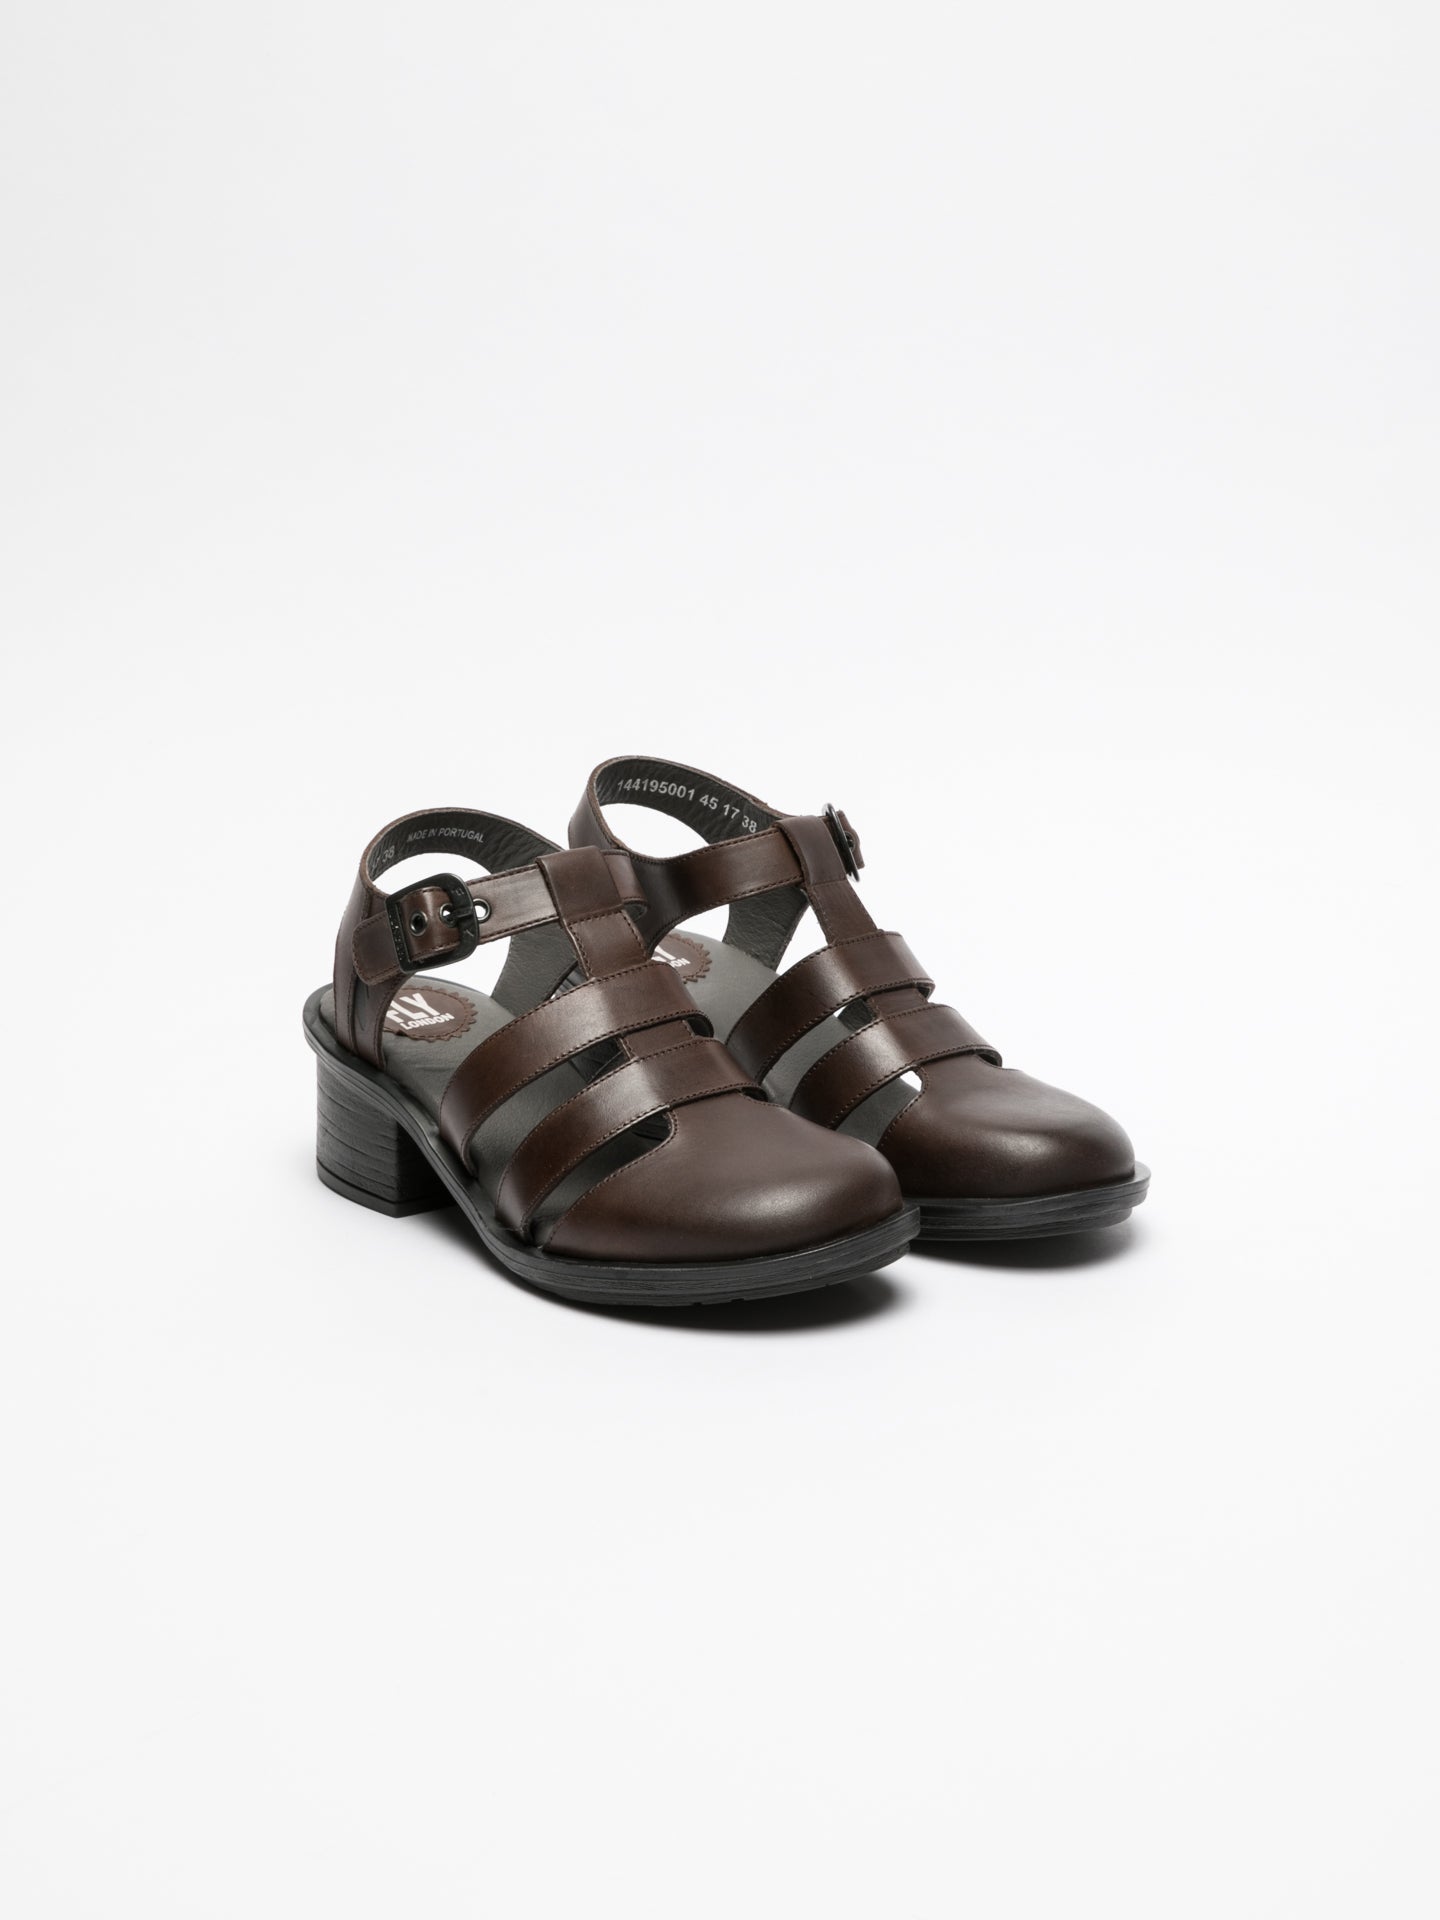 Fly London Brown Buckle Sandals